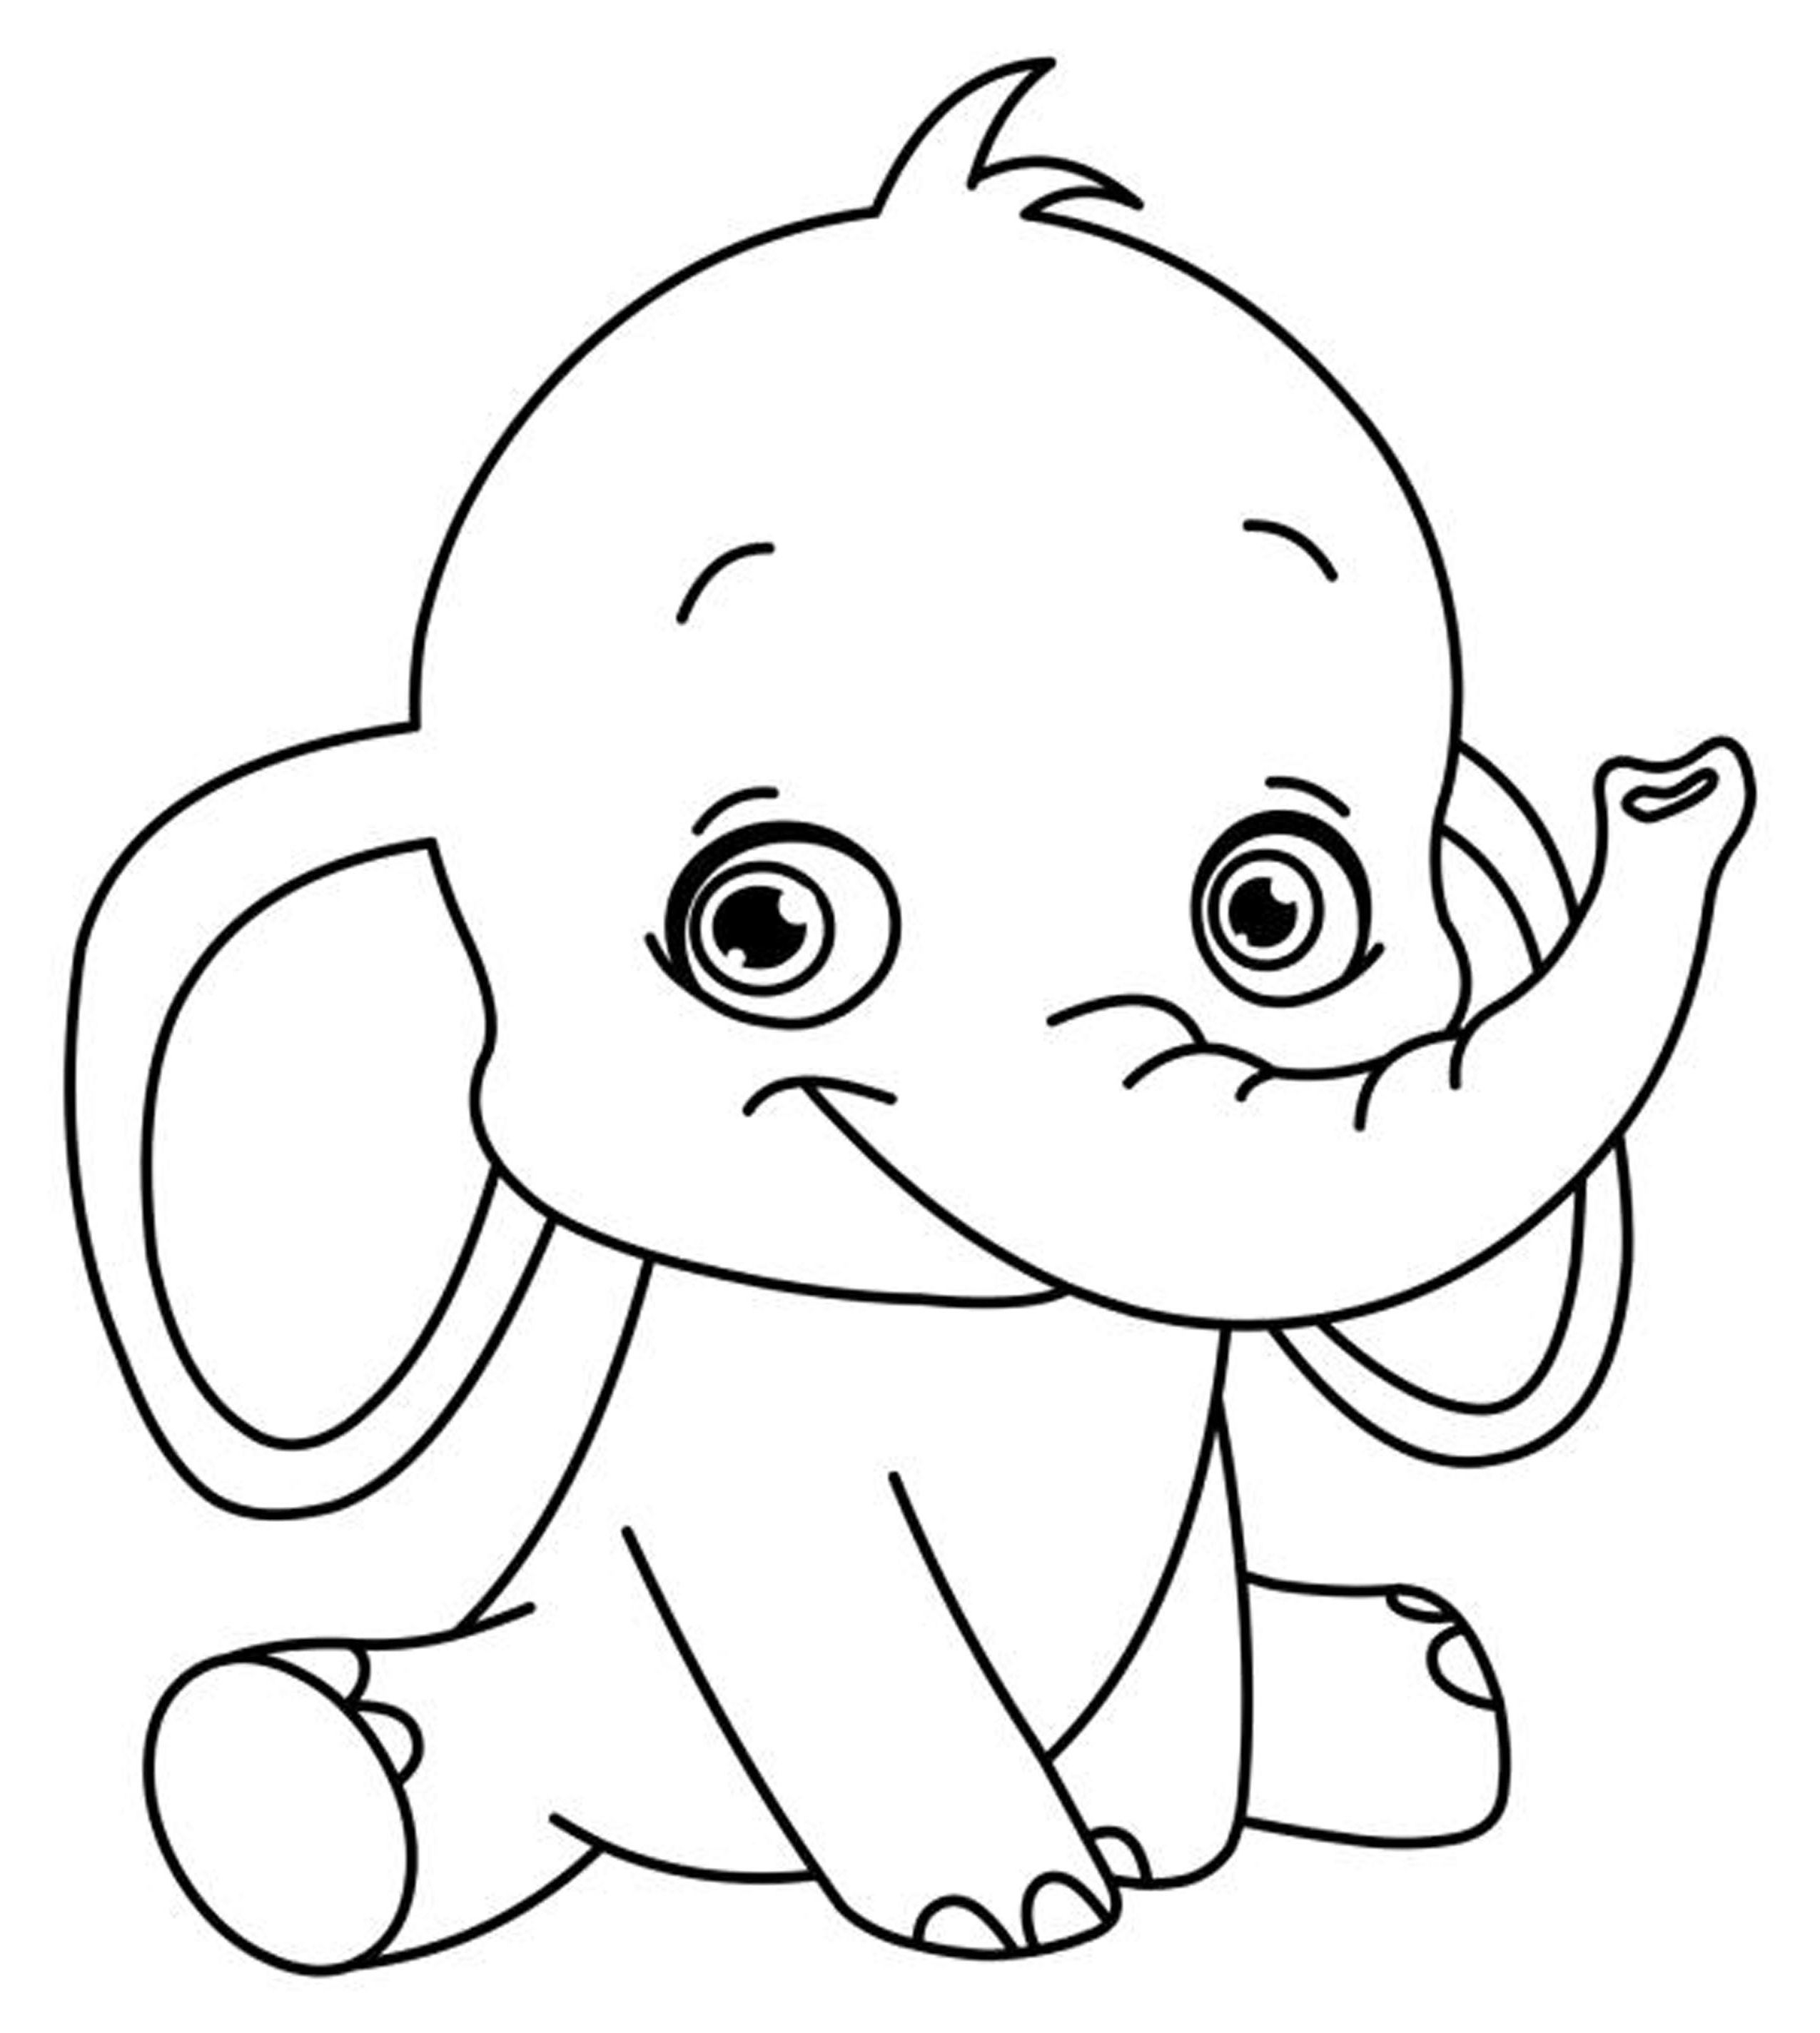 Markers Coloring Pages Coloring Pages Cute Ba Pooh Coloring Pages Disneyacters With